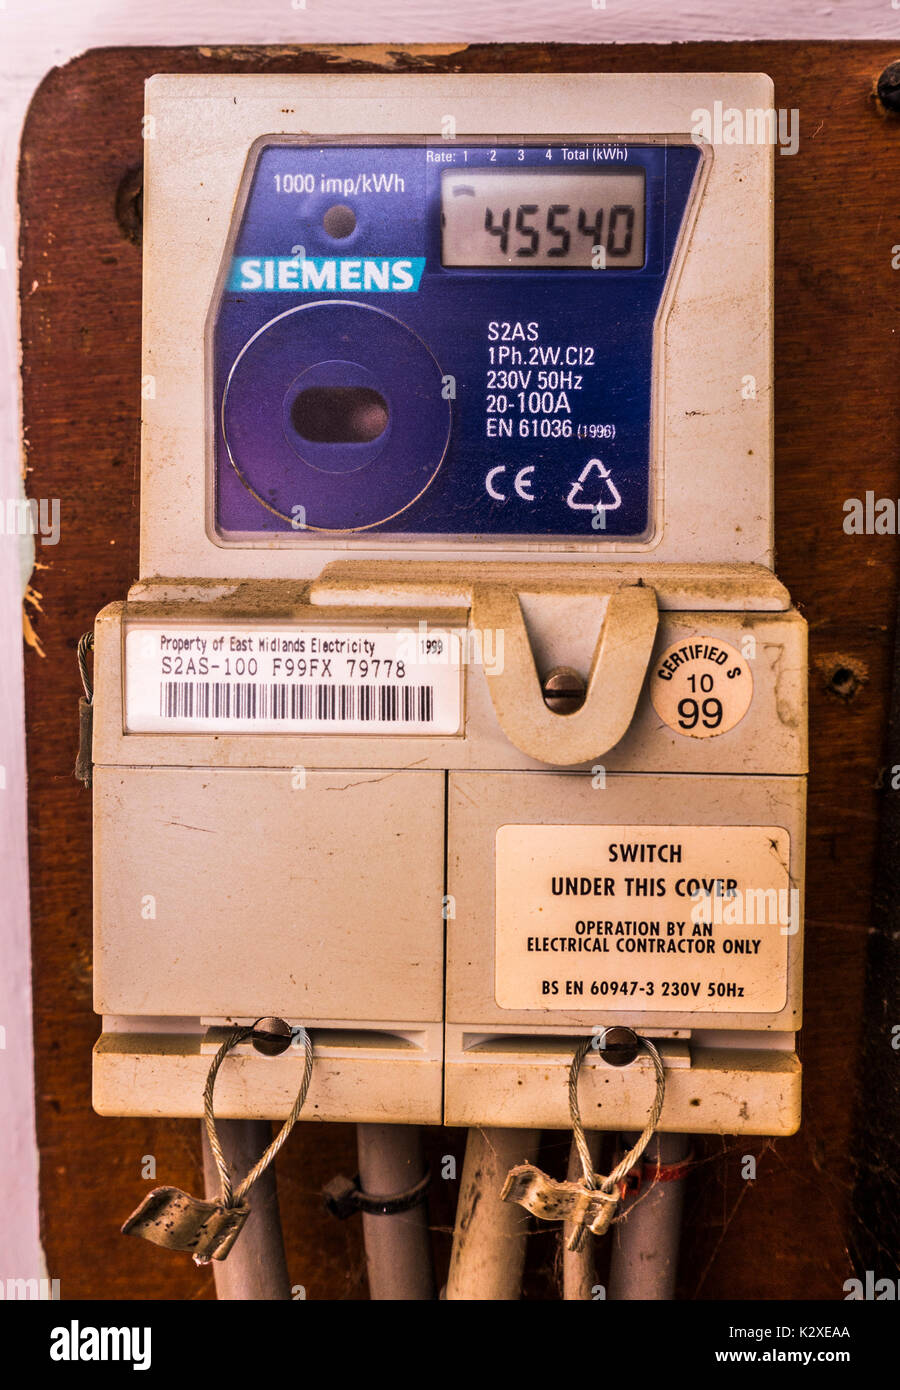 A Siemens electricity meter with consumption reading displayed, for the supply to a residential property. East Midlands, England, UK. Stock Photo